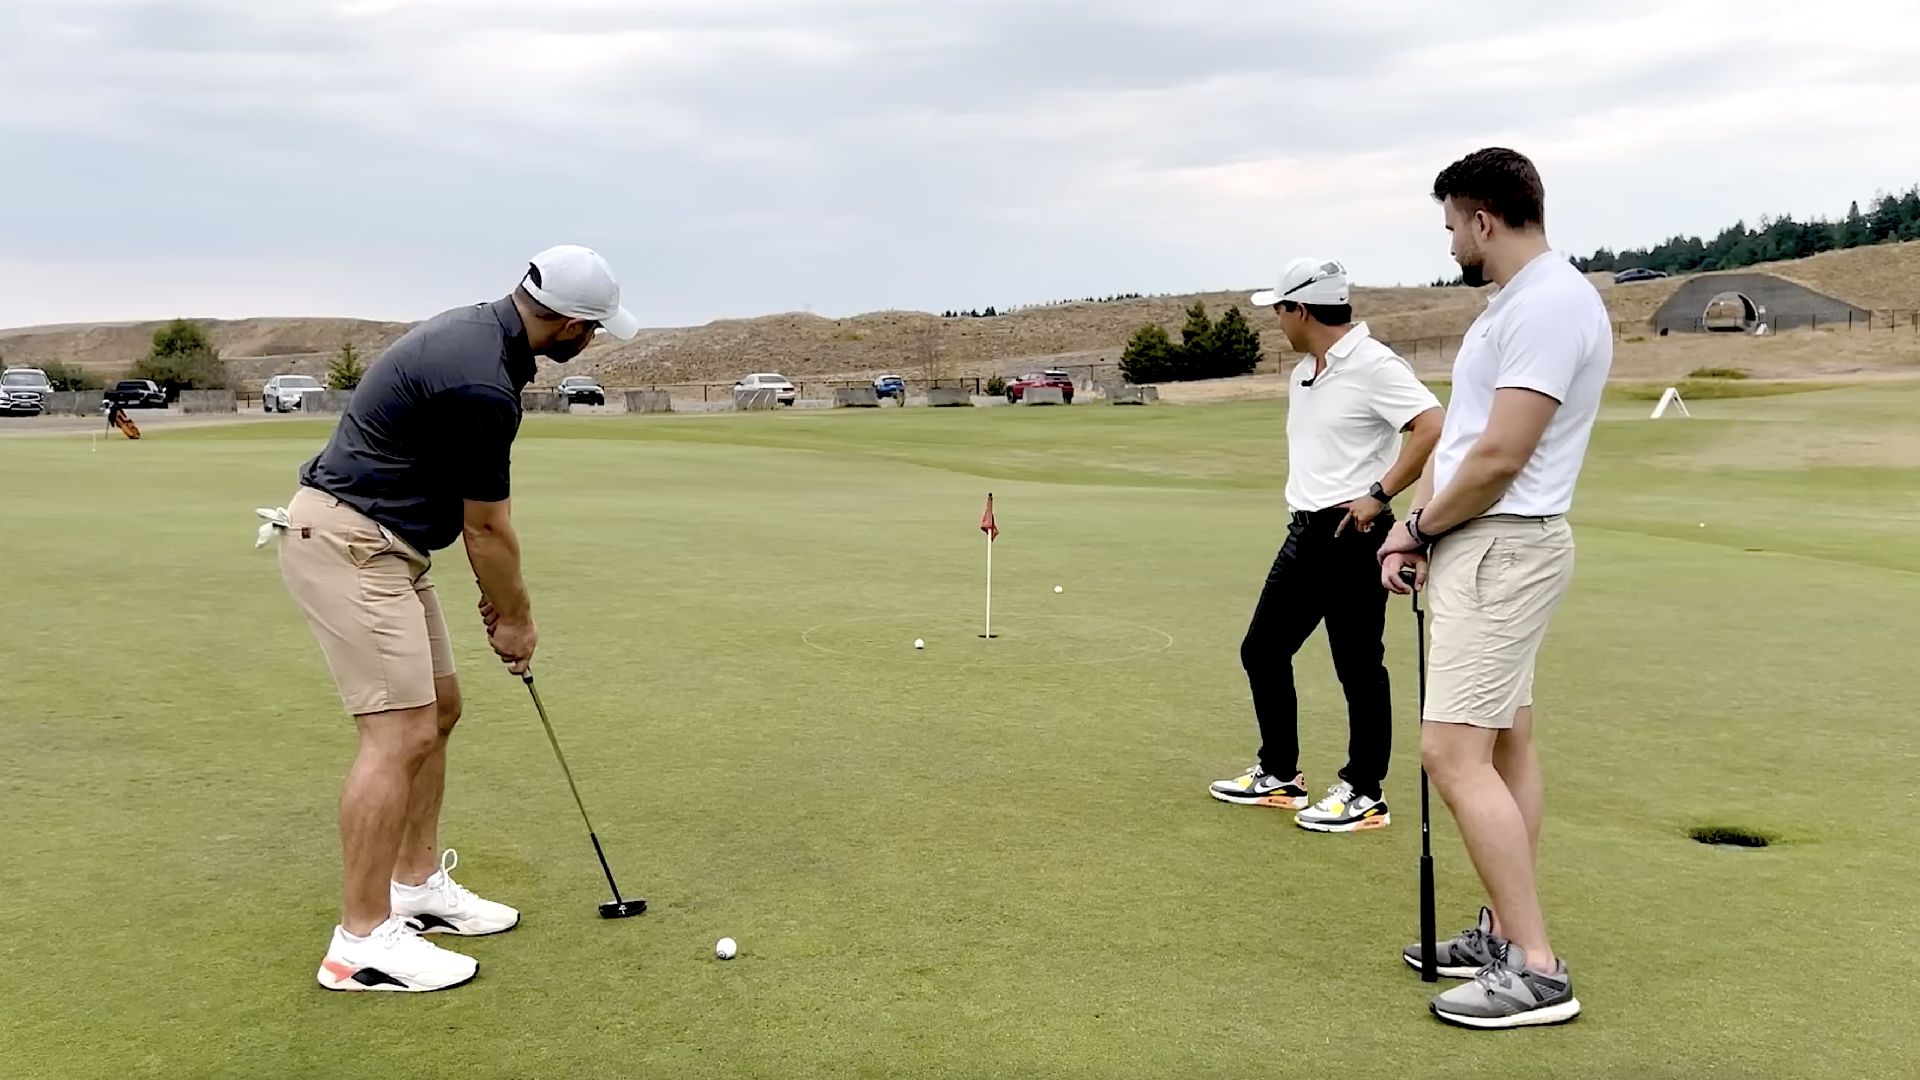 This Putting Practice Contest will help dial you in before your next round